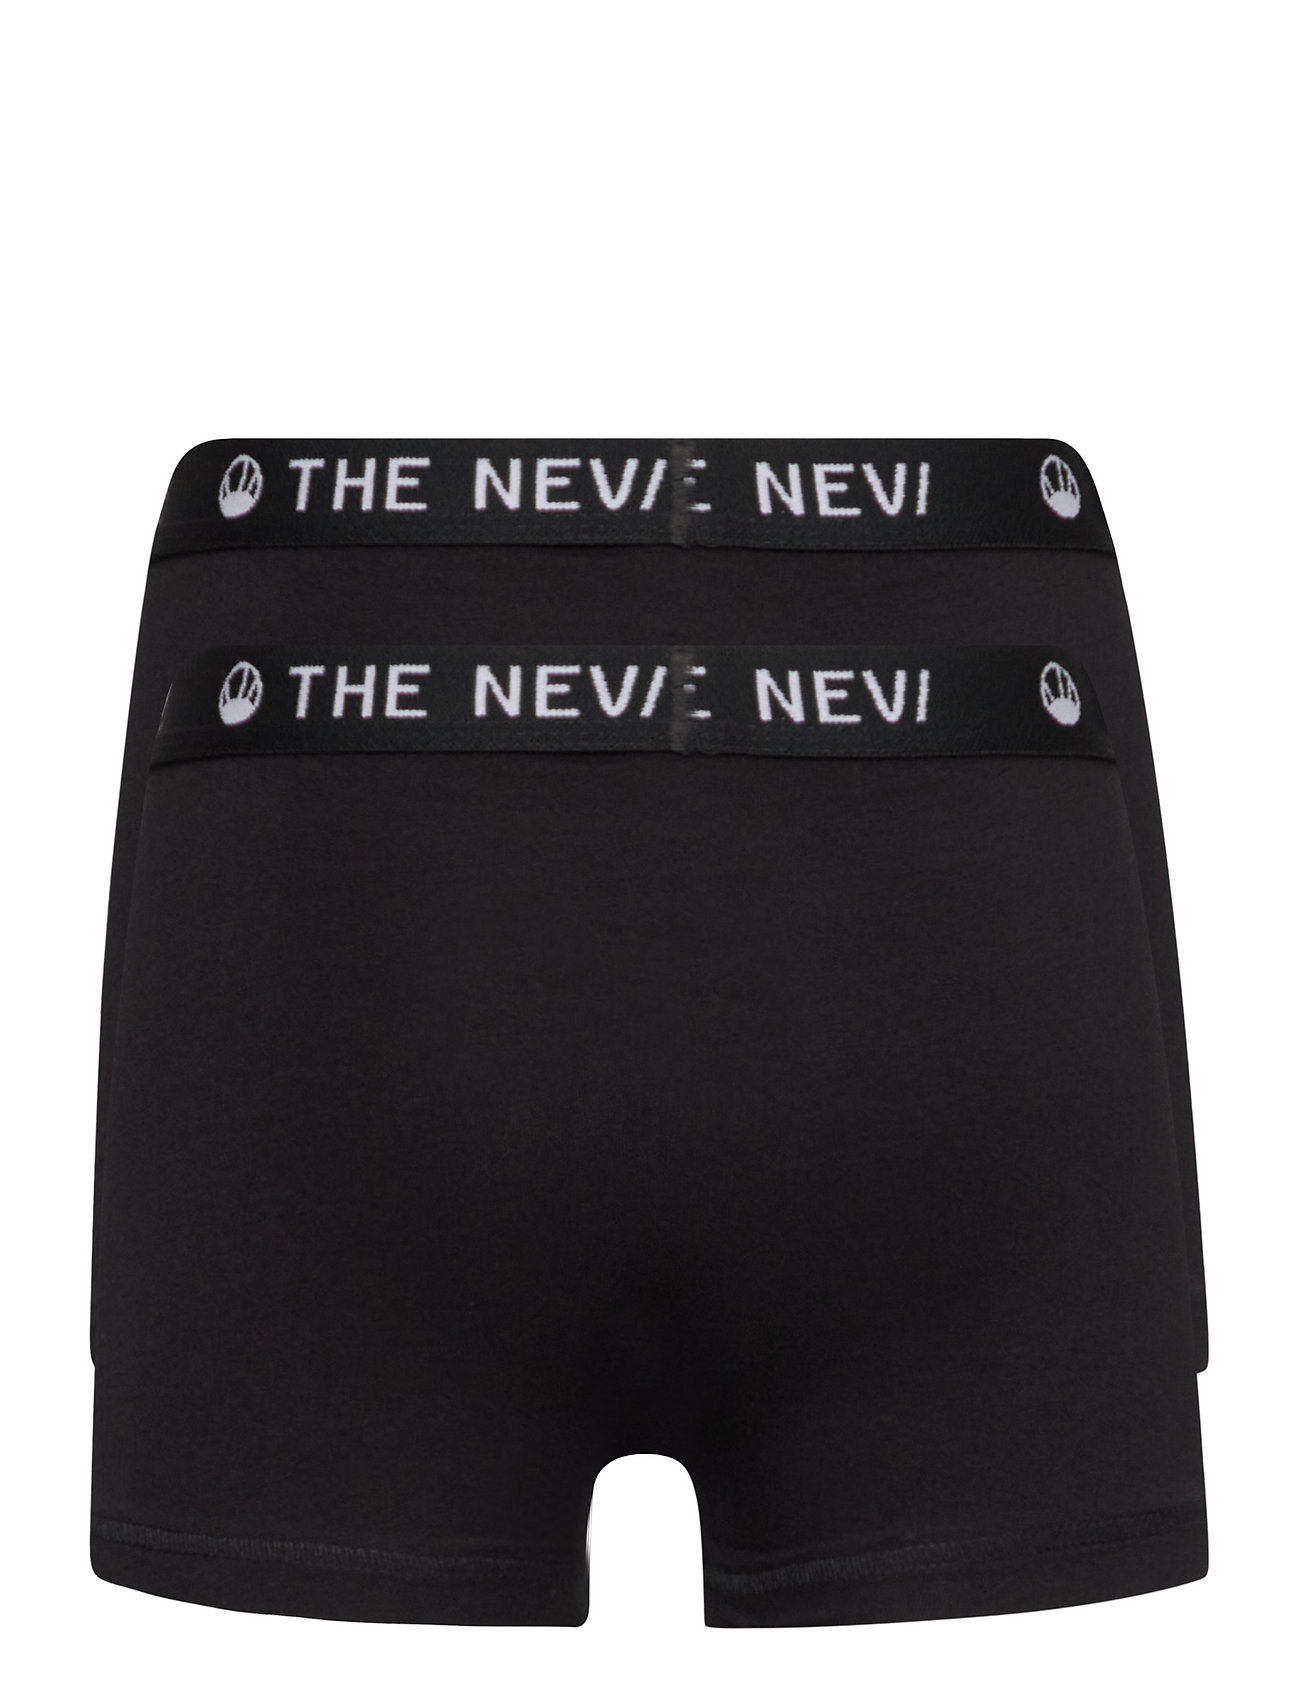 The New - 2-PACK ORGANIC BOXERS NOOS - bottoms - black/black - 1